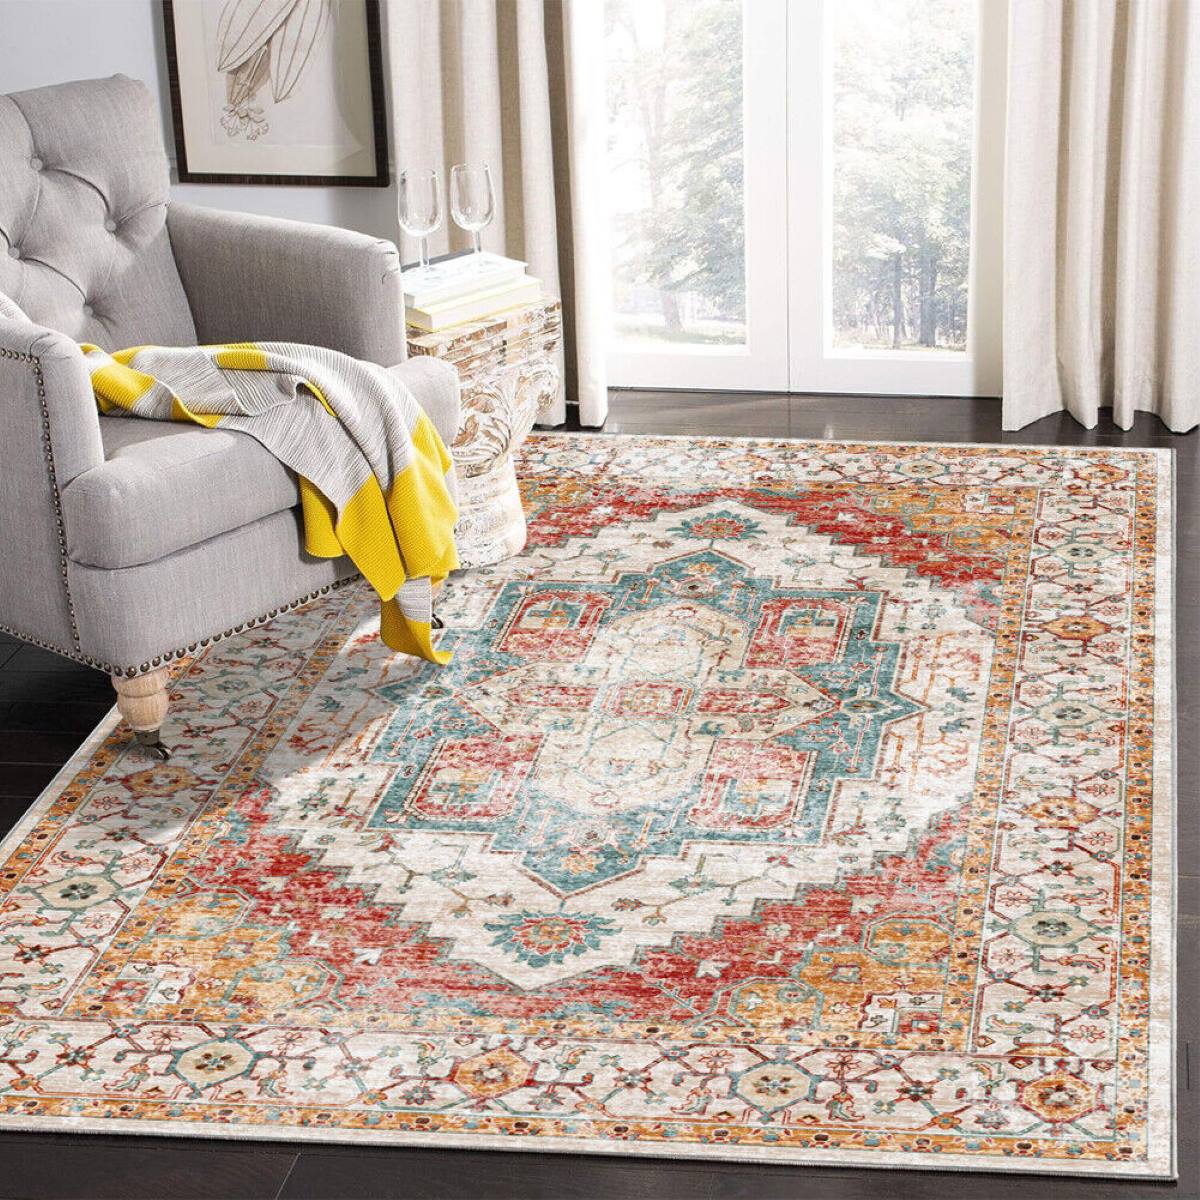 How To Sell Used Oriental Rugs